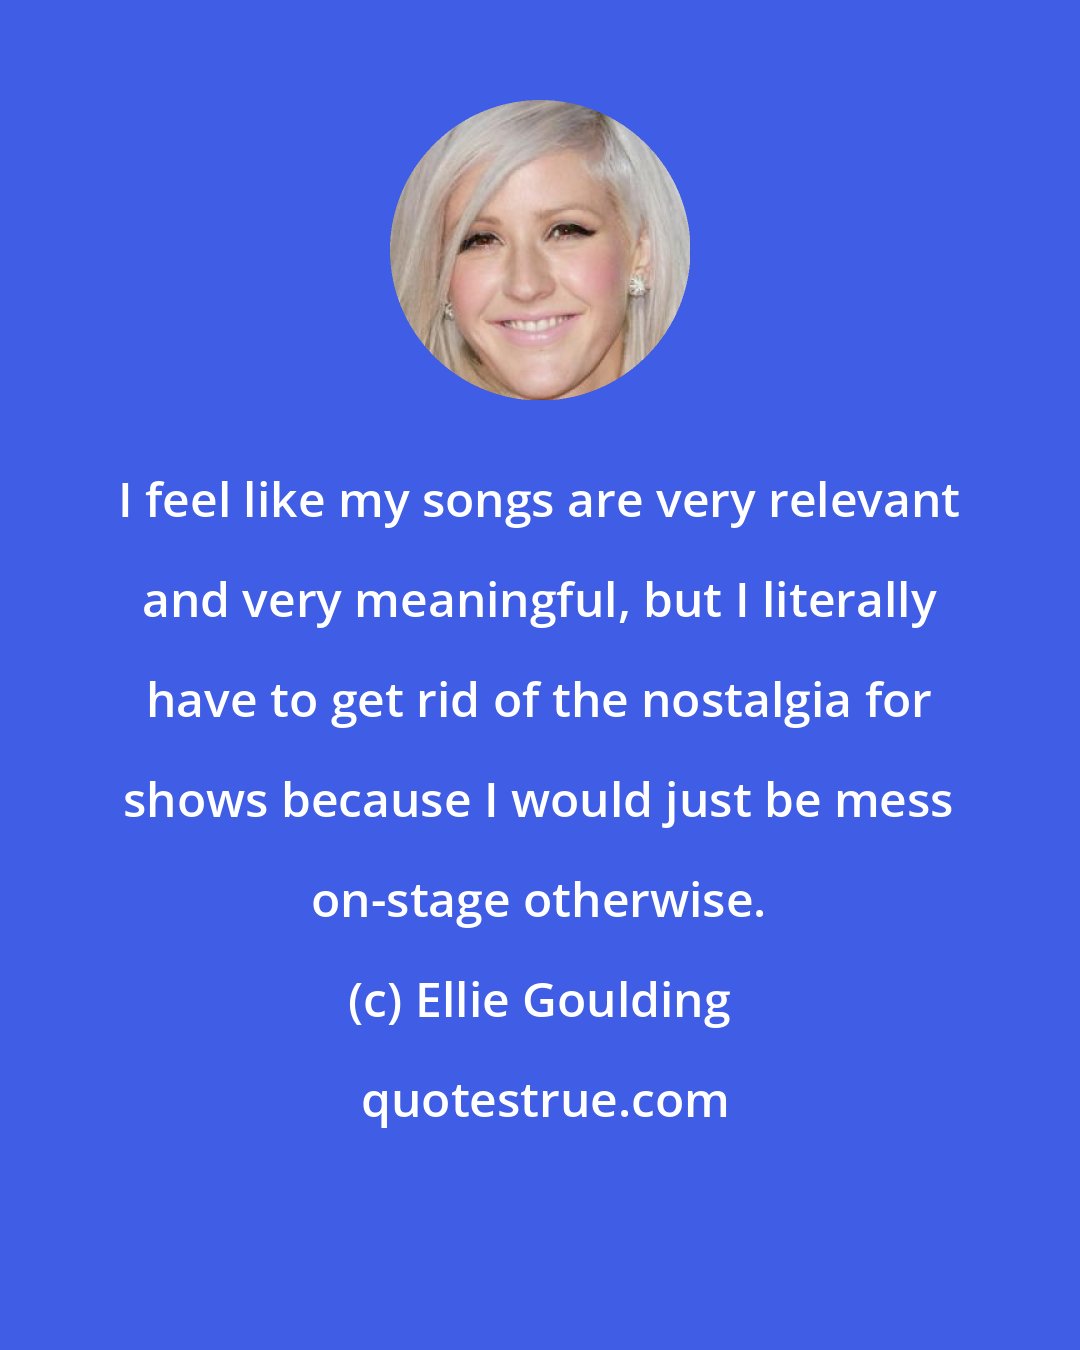 Ellie Goulding: I feel like my songs are very relevant and very meaningful, but I literally have to get rid of the nostalgia for shows because I would just be mess on-stage otherwise.